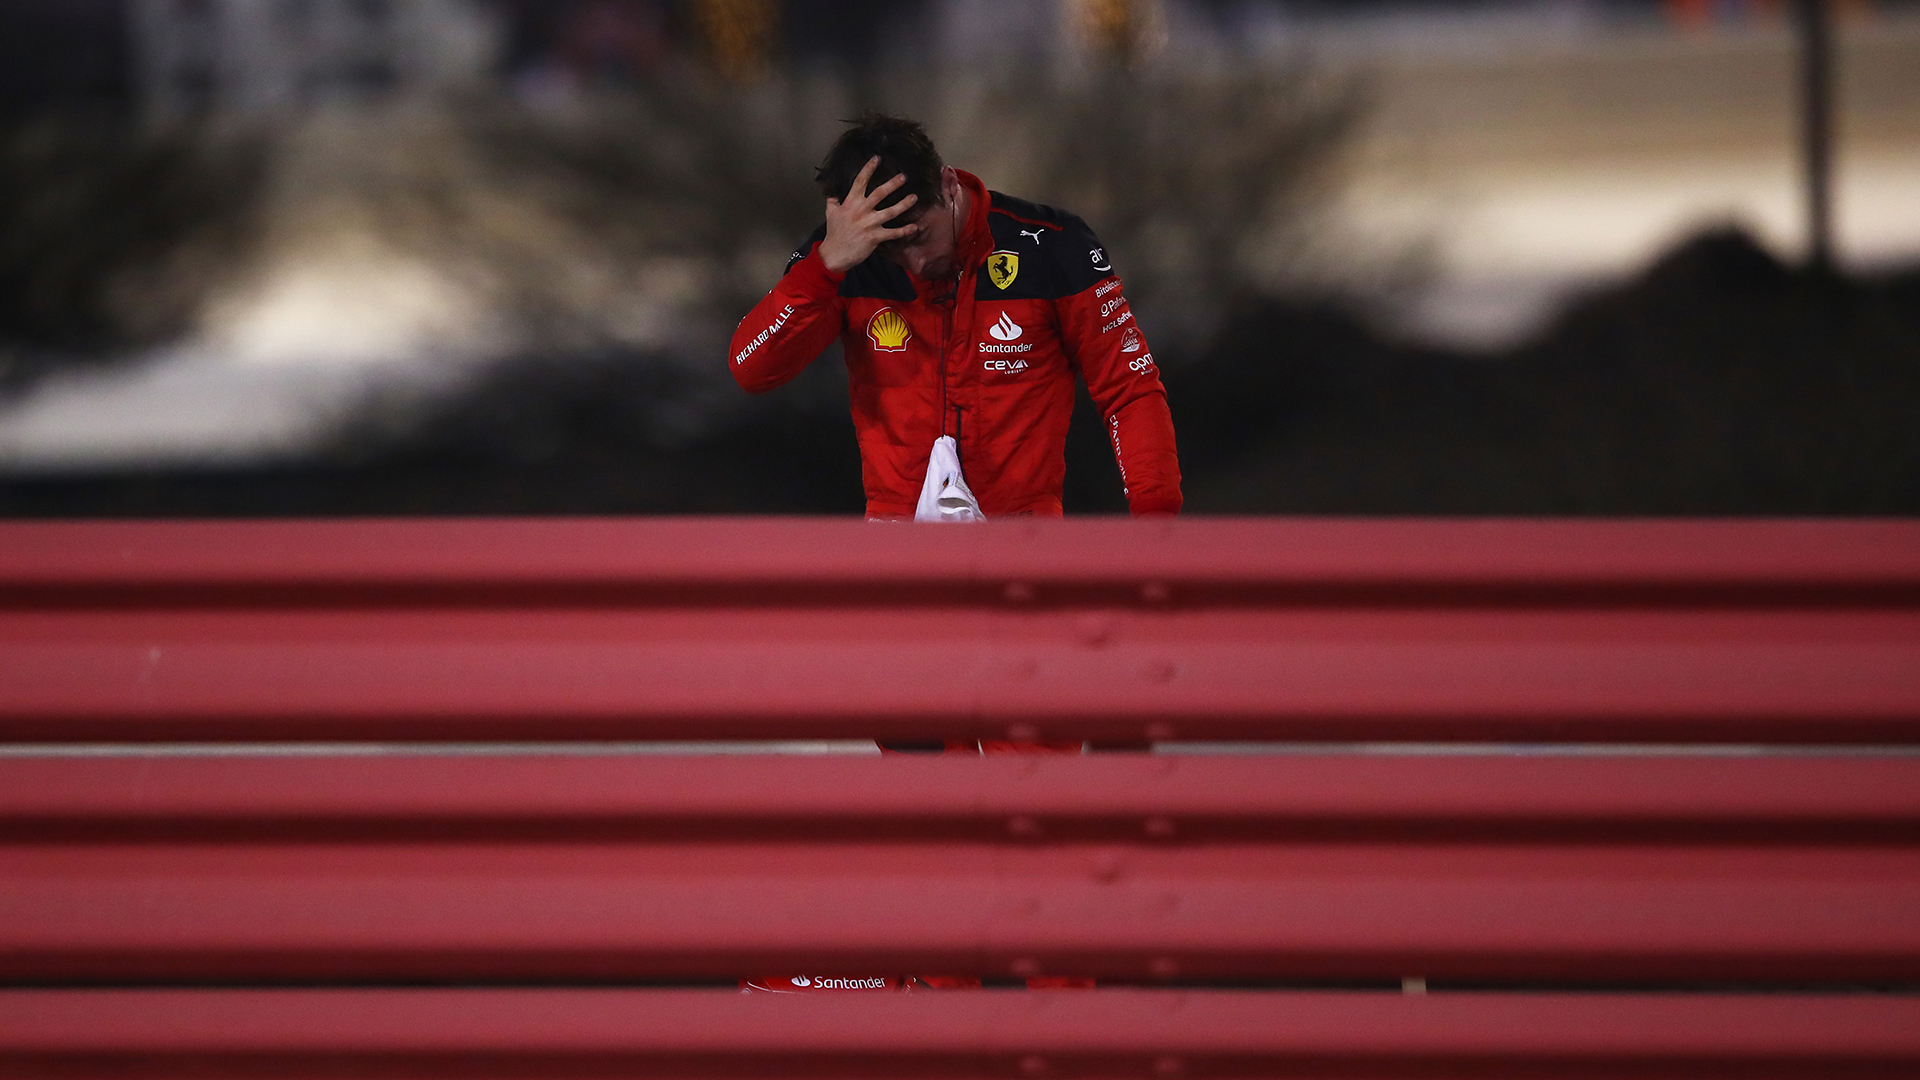 Charles Leclerc of Monaco and Ferrari looks on after retiring from the race during the F1 Grand Prix of Bahrain at Bahrain International Circuit on March 05, 2023 in Bahrain, Bahrain.